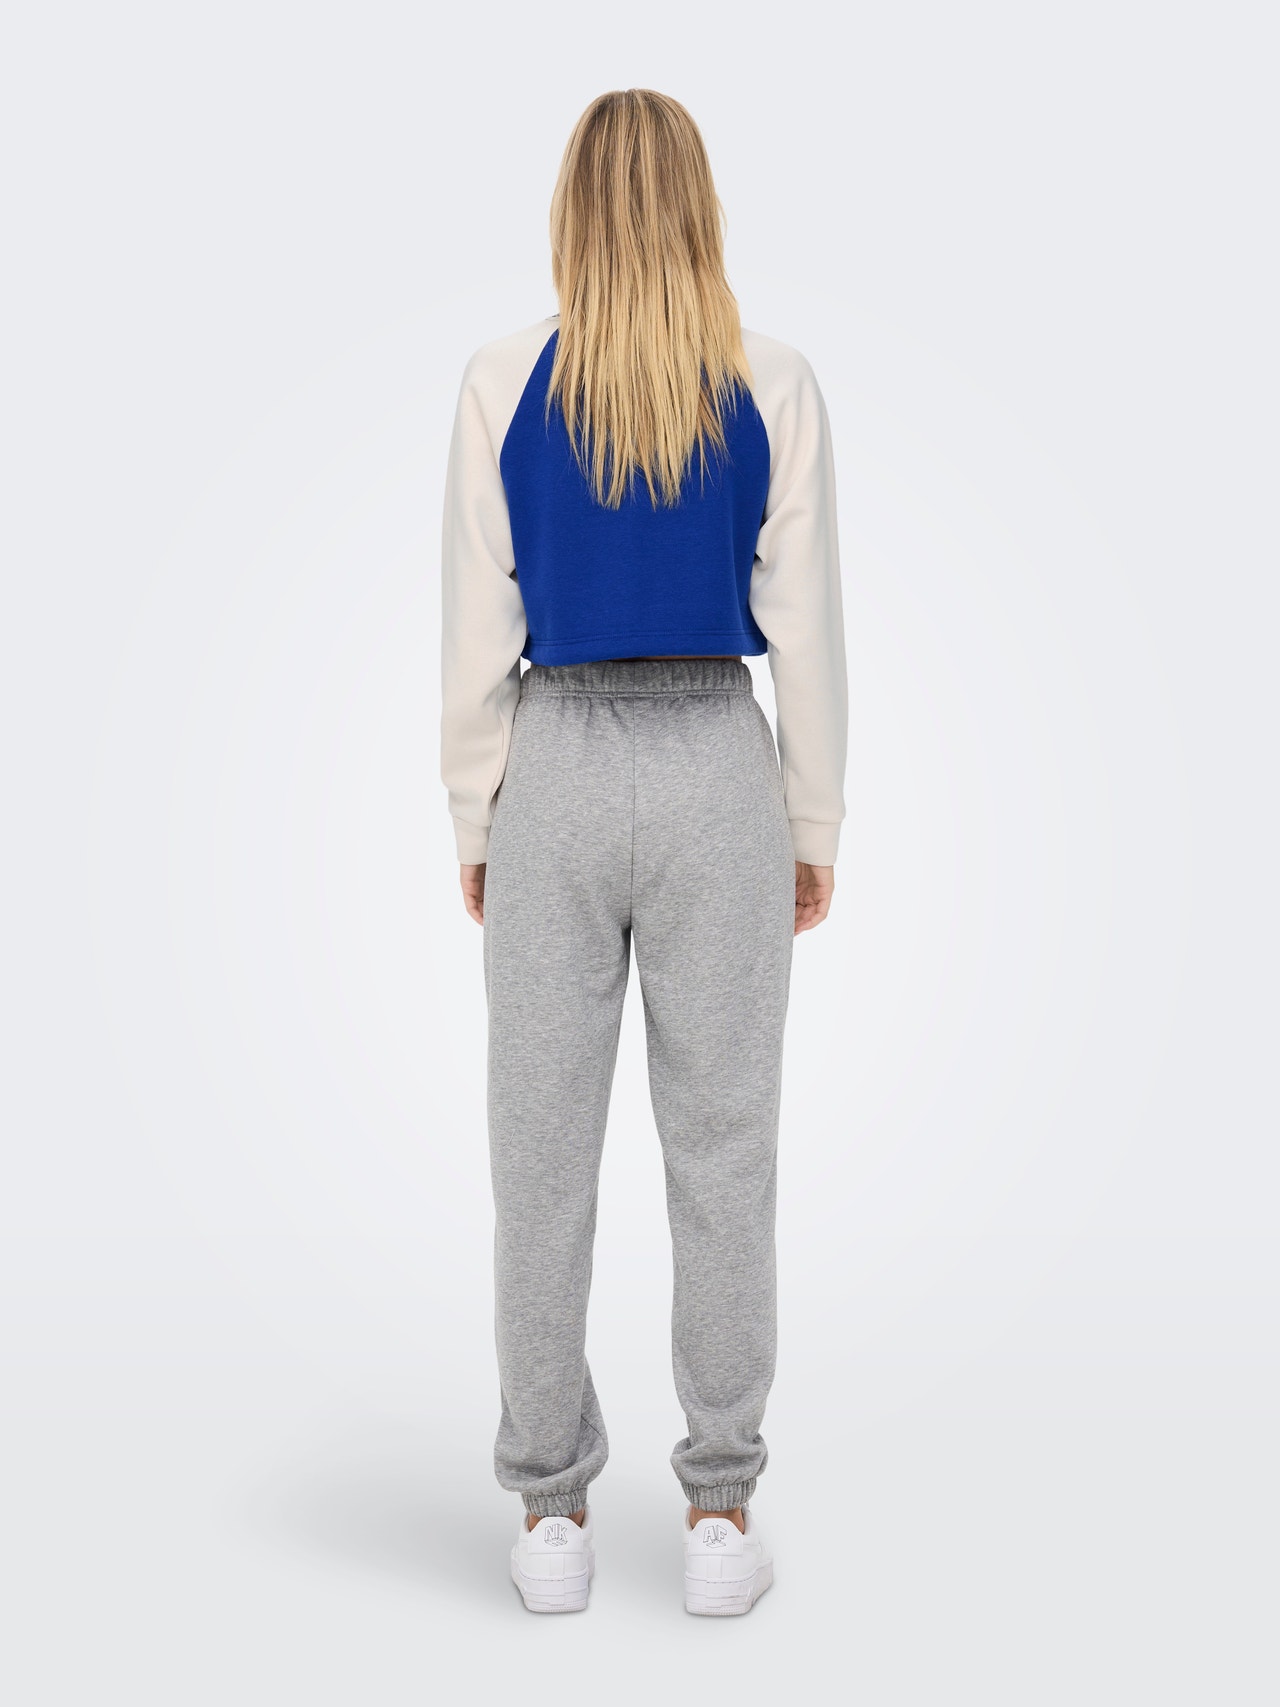 ONLY Cropped Fit O-Neck Sweatshirt -Sodalite Blue - 15273876